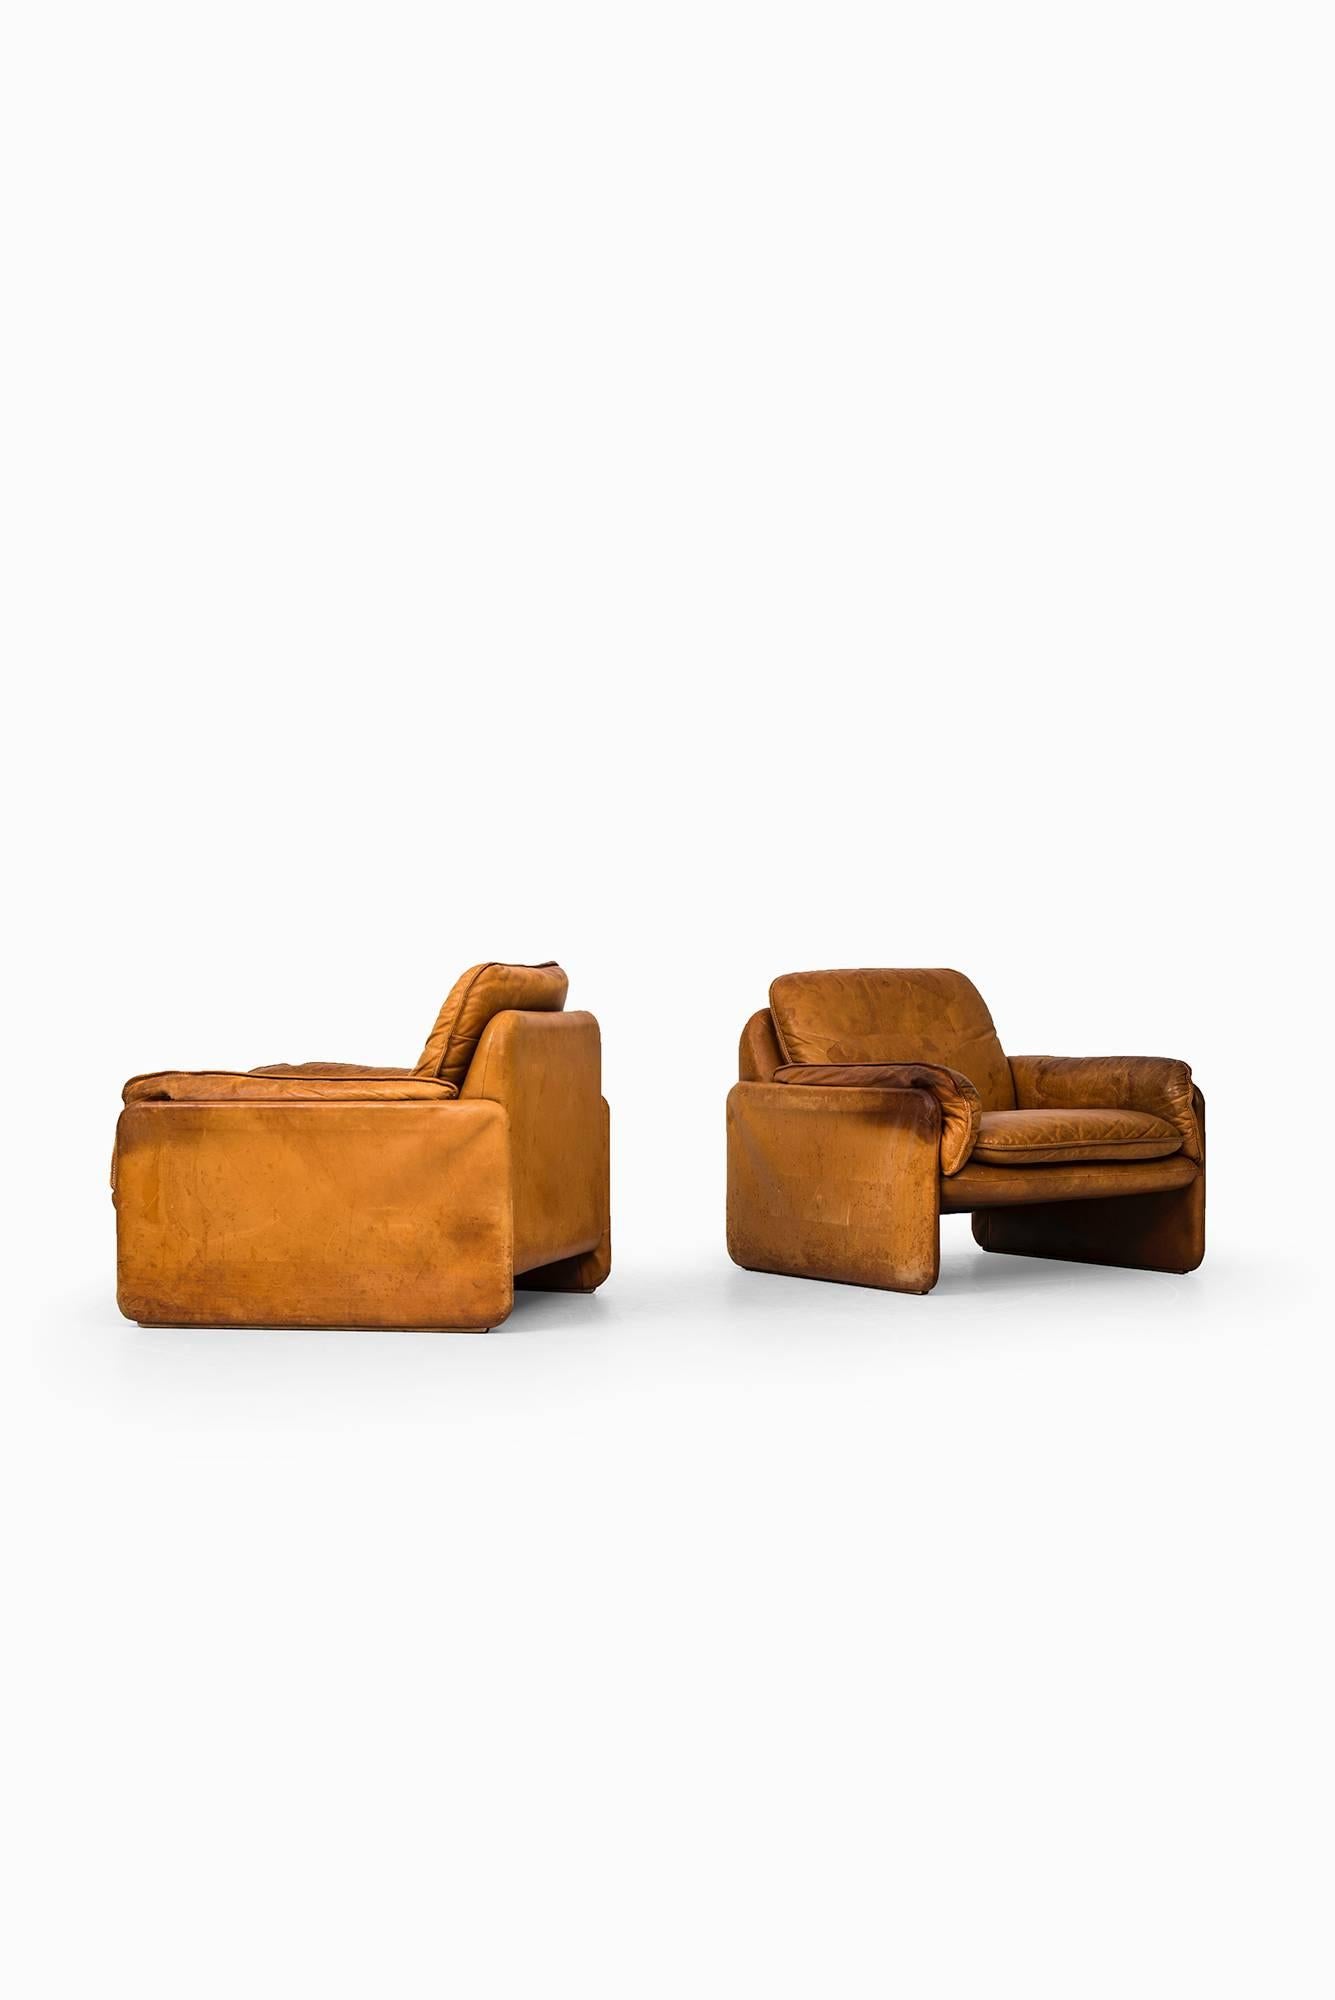 Easy Chairs in Cognac Brown Leather by De Sede in Switzerland 1